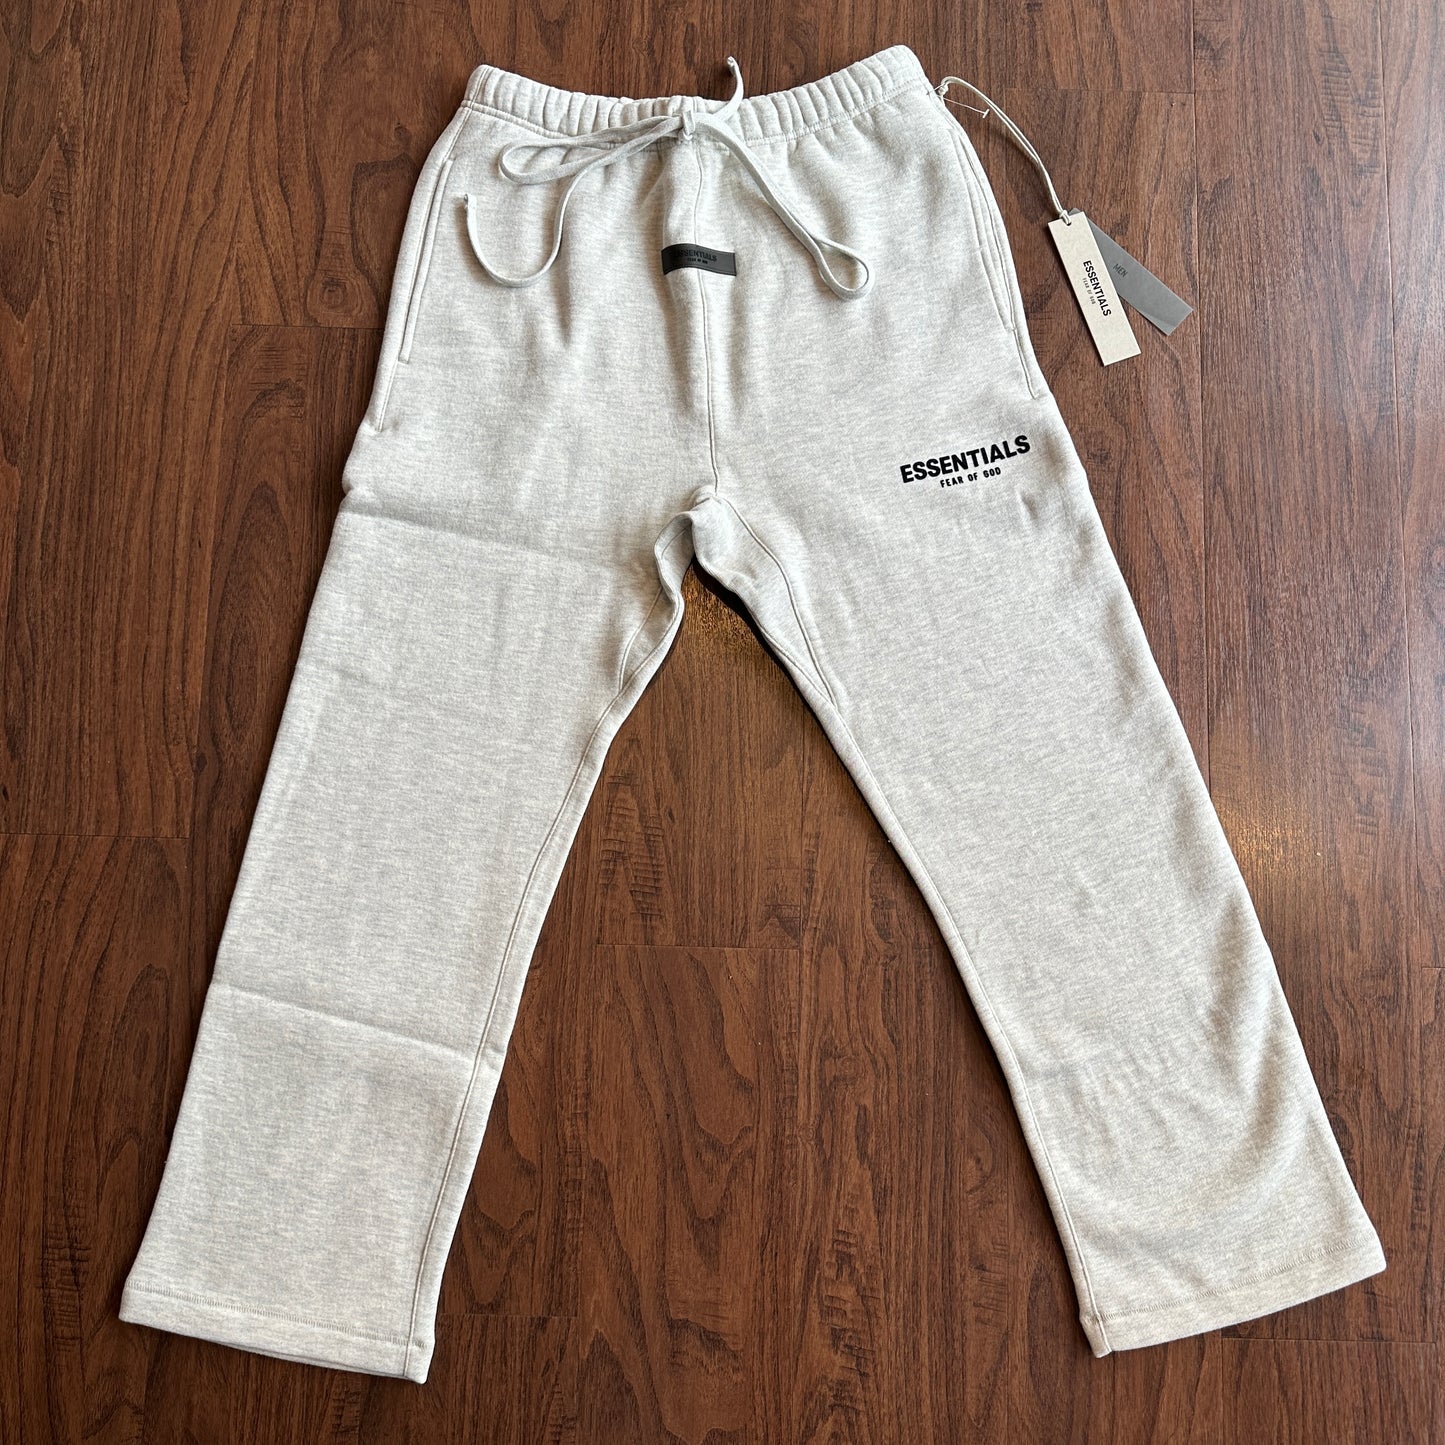 Essentials Fear of God Sweatpant Grey Light Oatmeal Relaxed